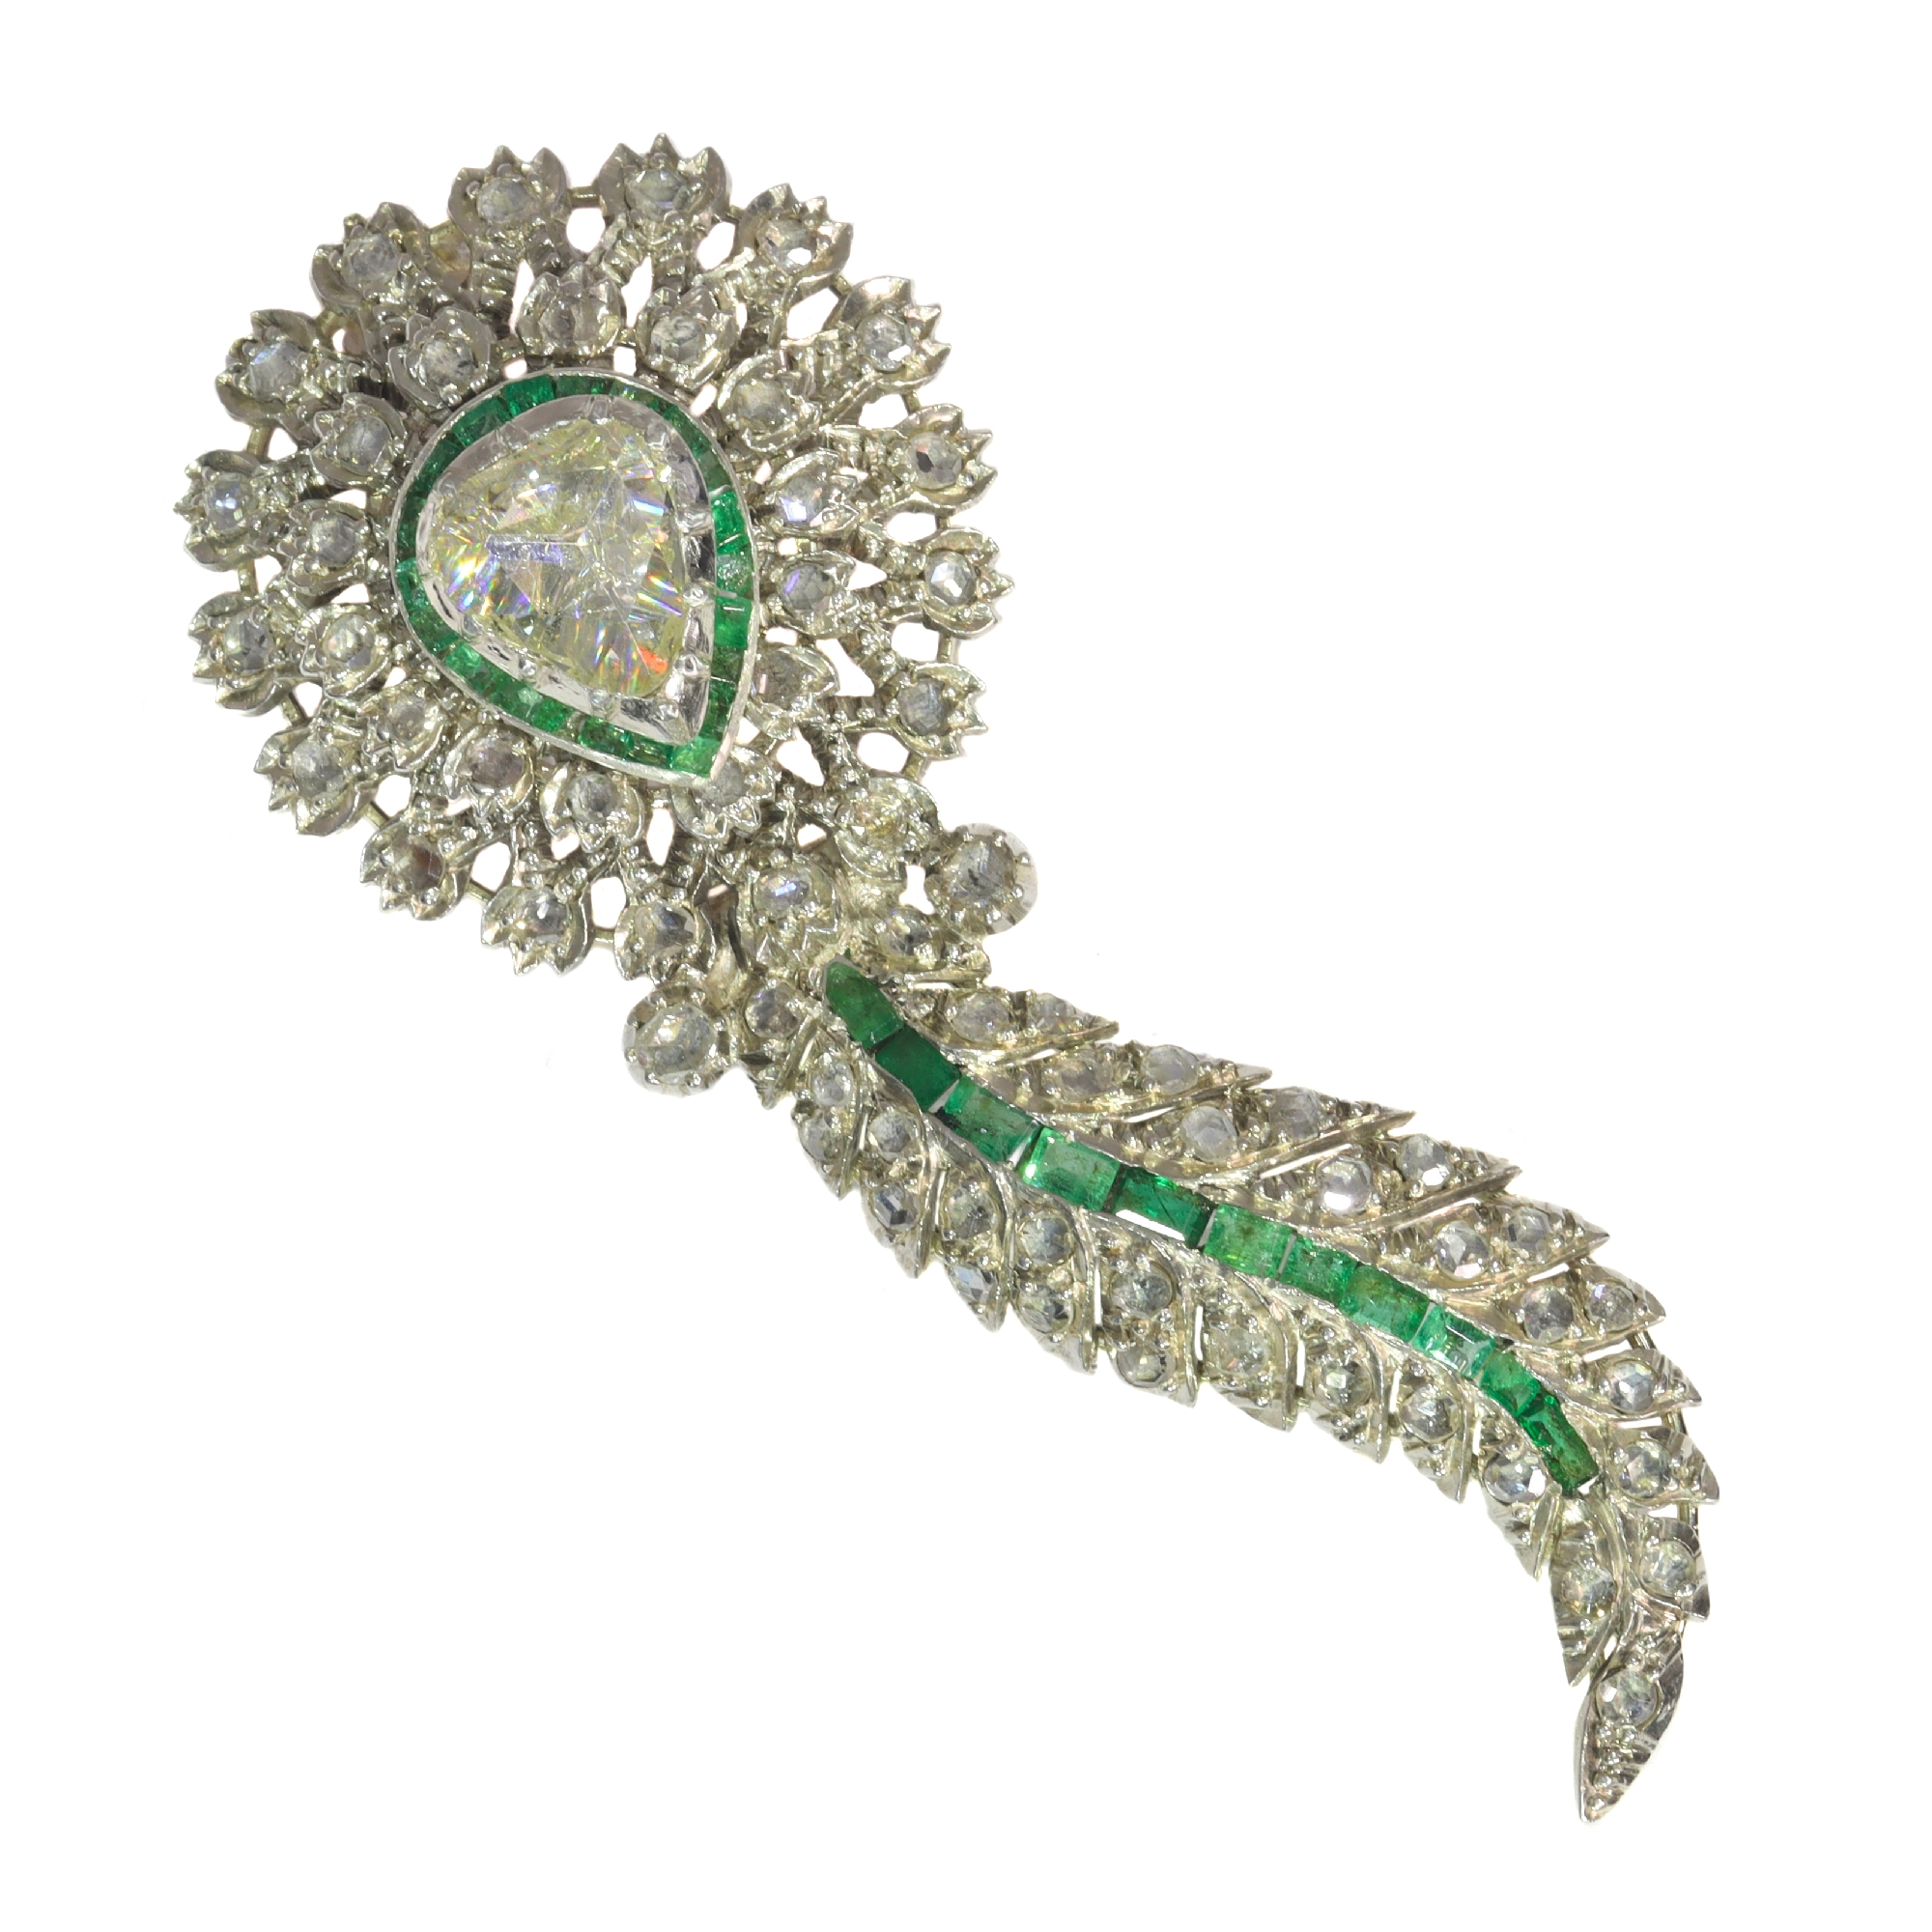 Antique brooch with large pear shaped rose cut diamond and set with many rose cut diamonds and carre cut emeralds